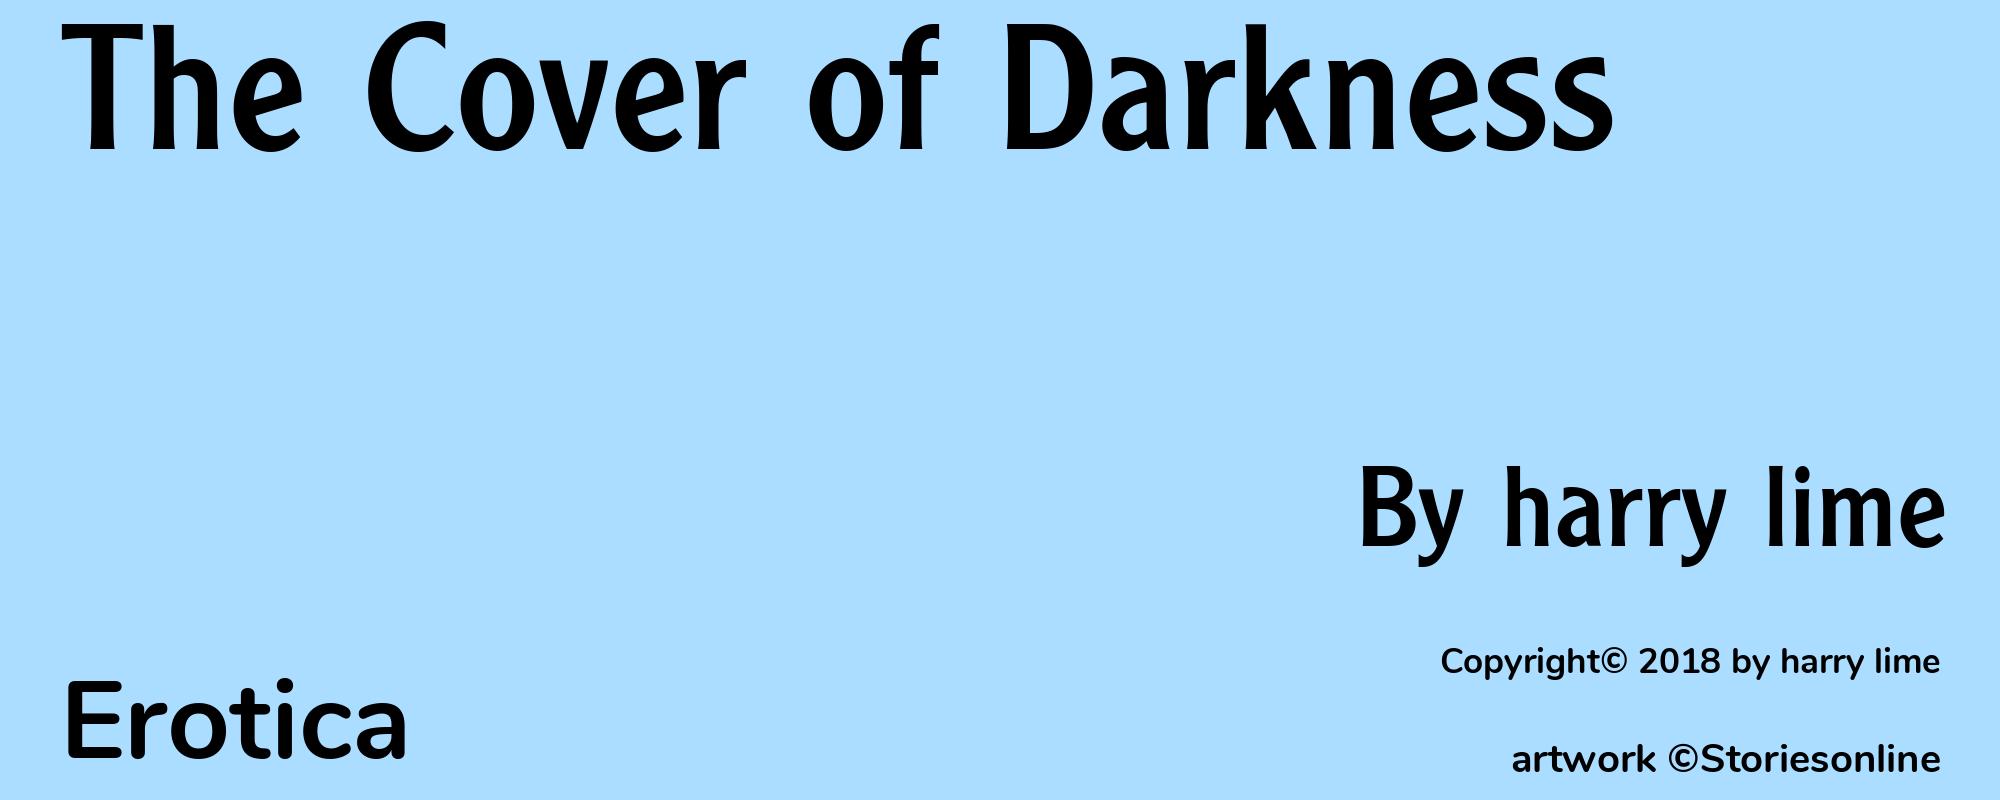 The Cover of Darkness - Cover